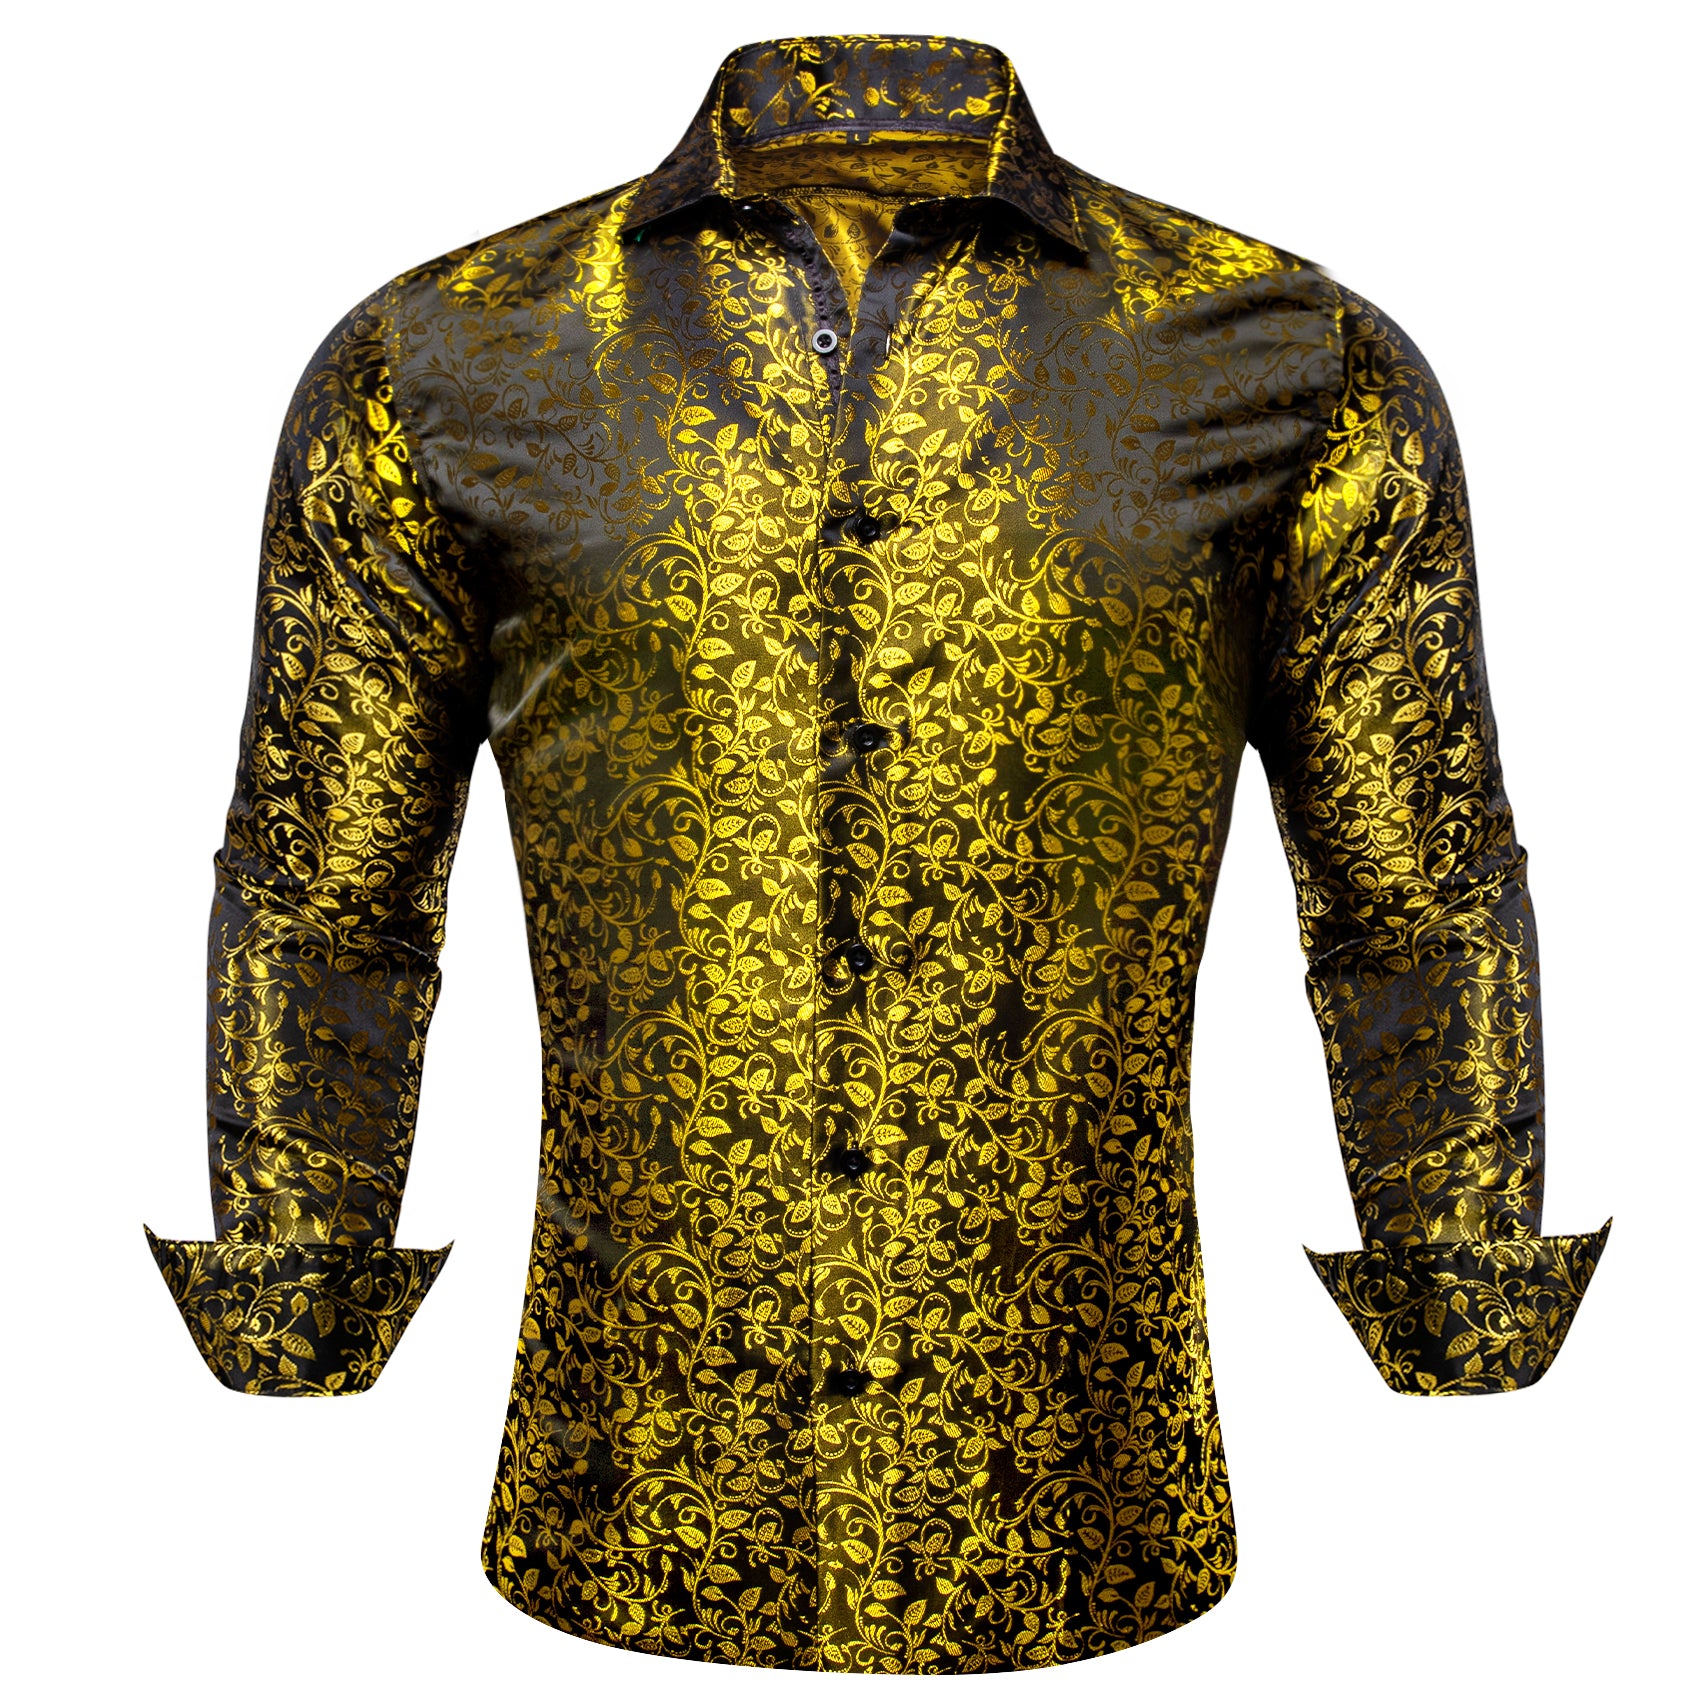 Barry.wang Luxury Olive Green Leaves Floral Silk Shirt